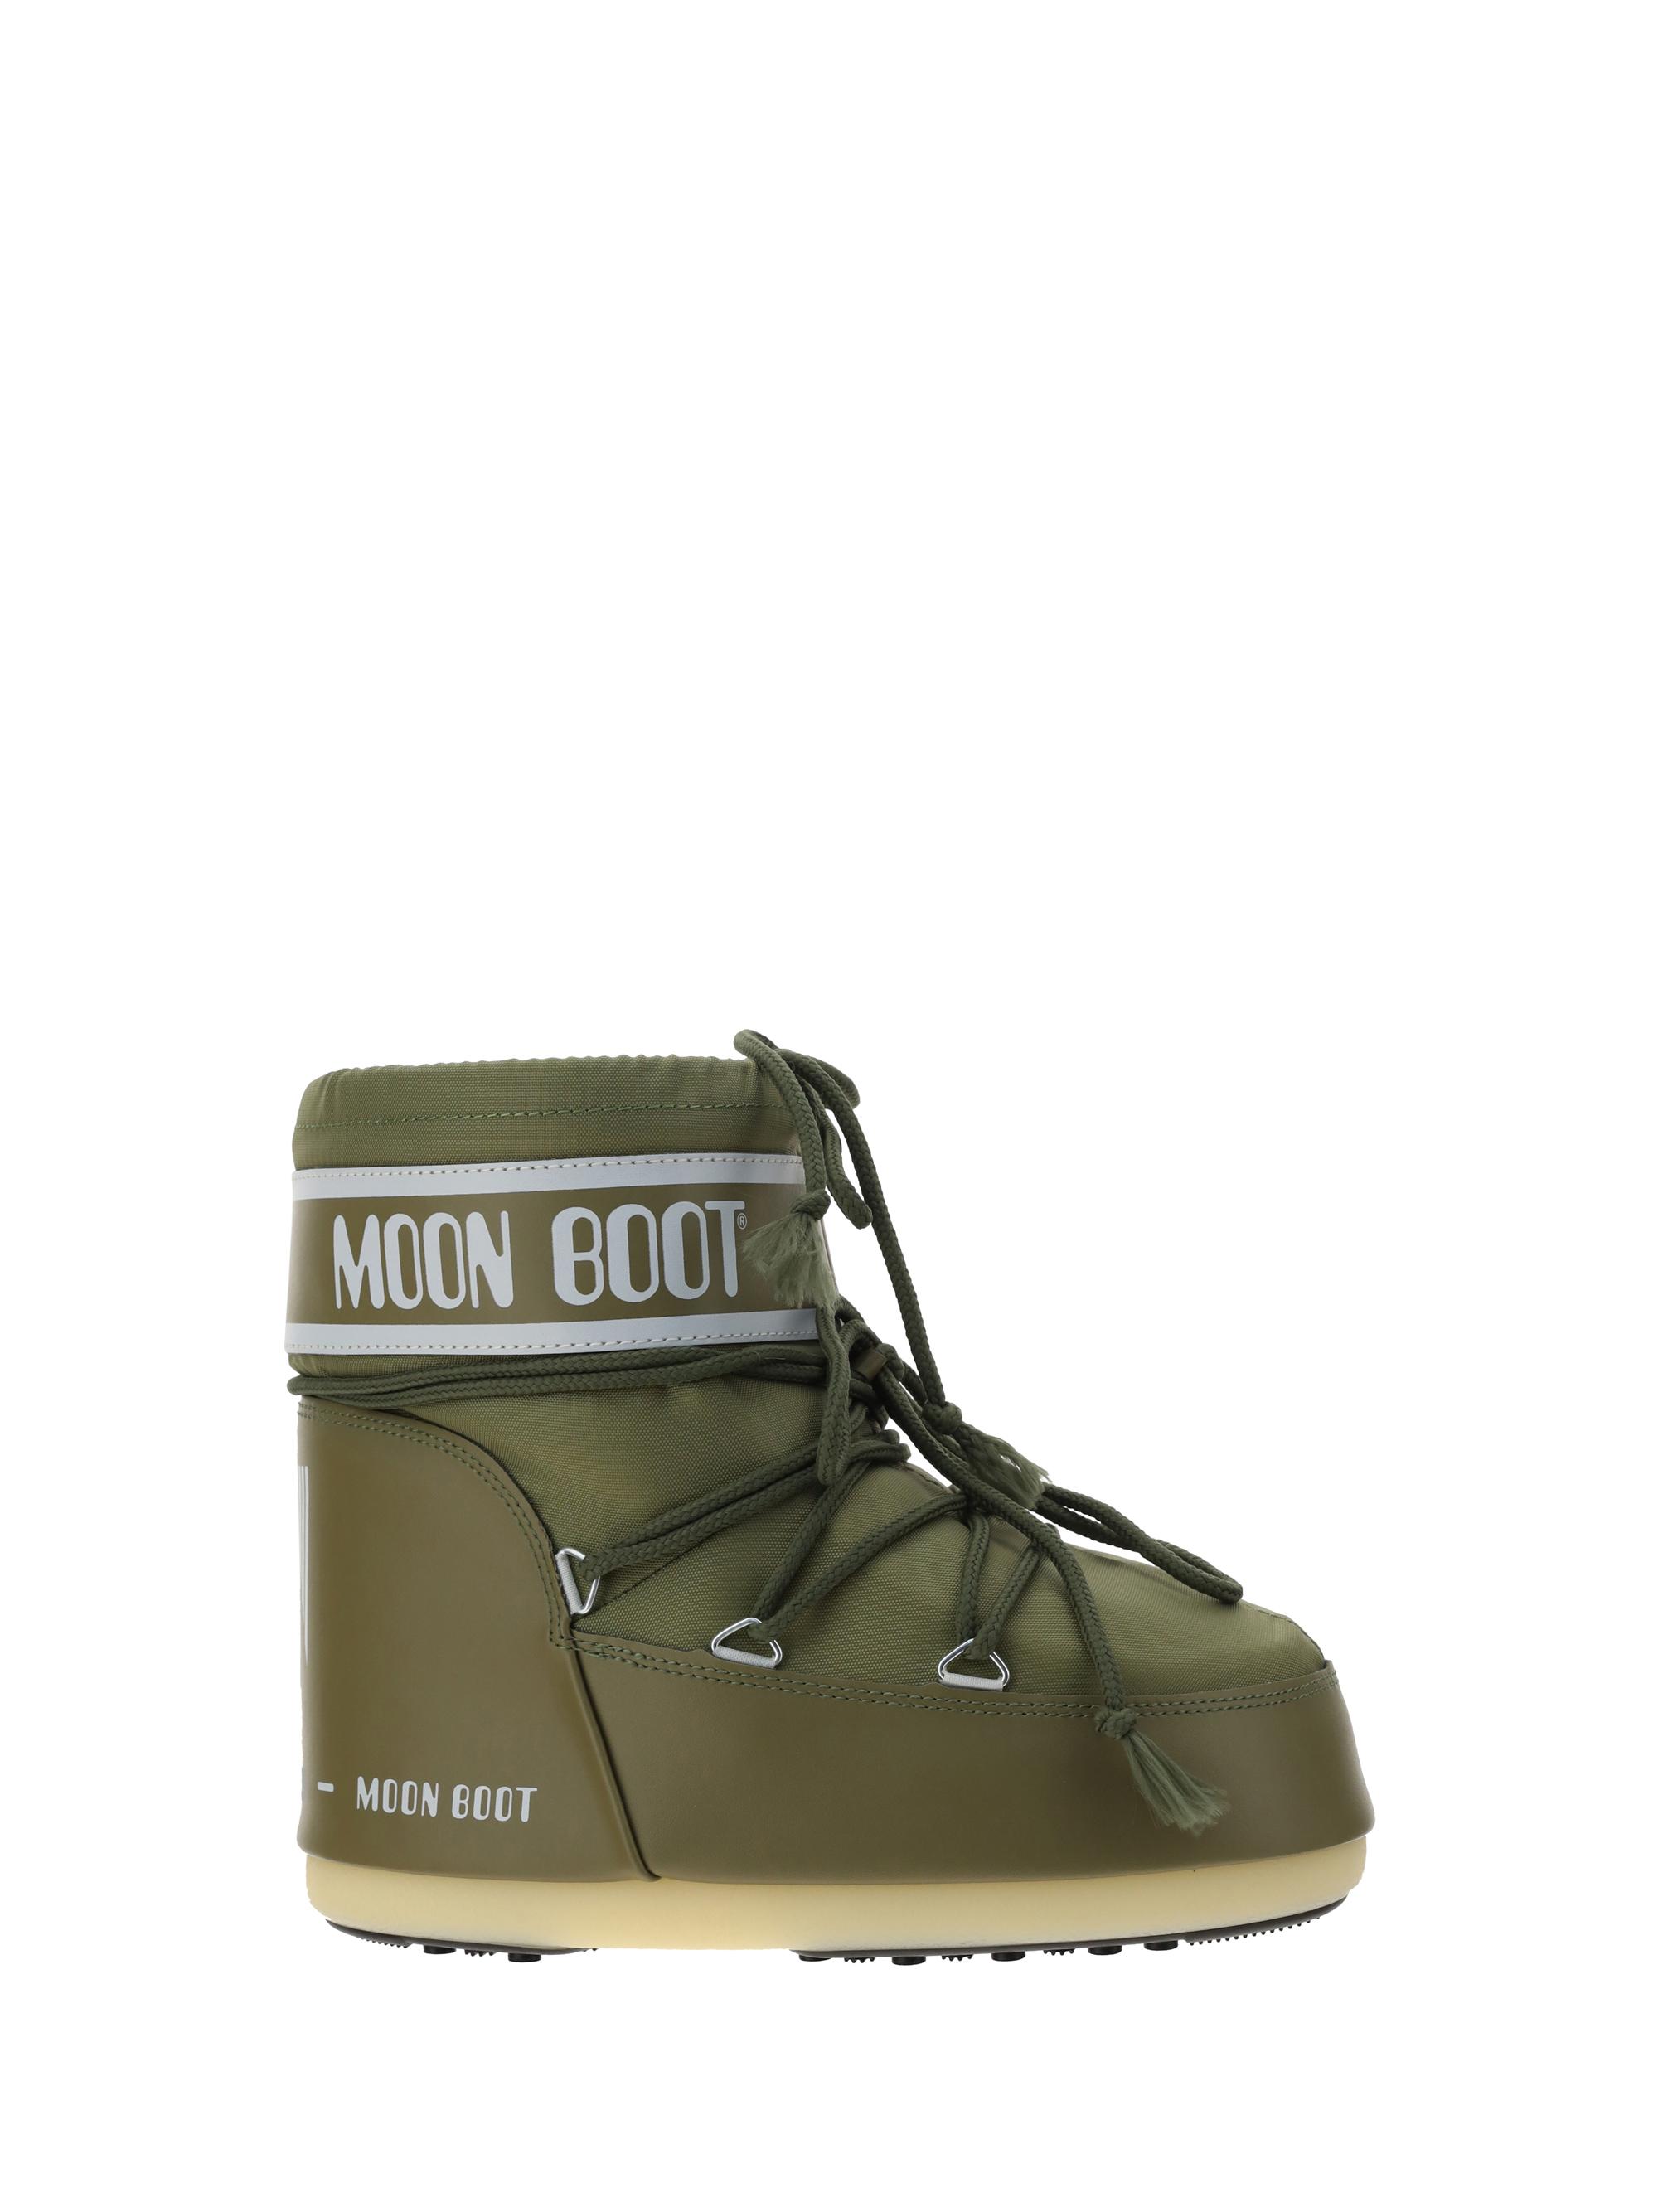 moon boots low